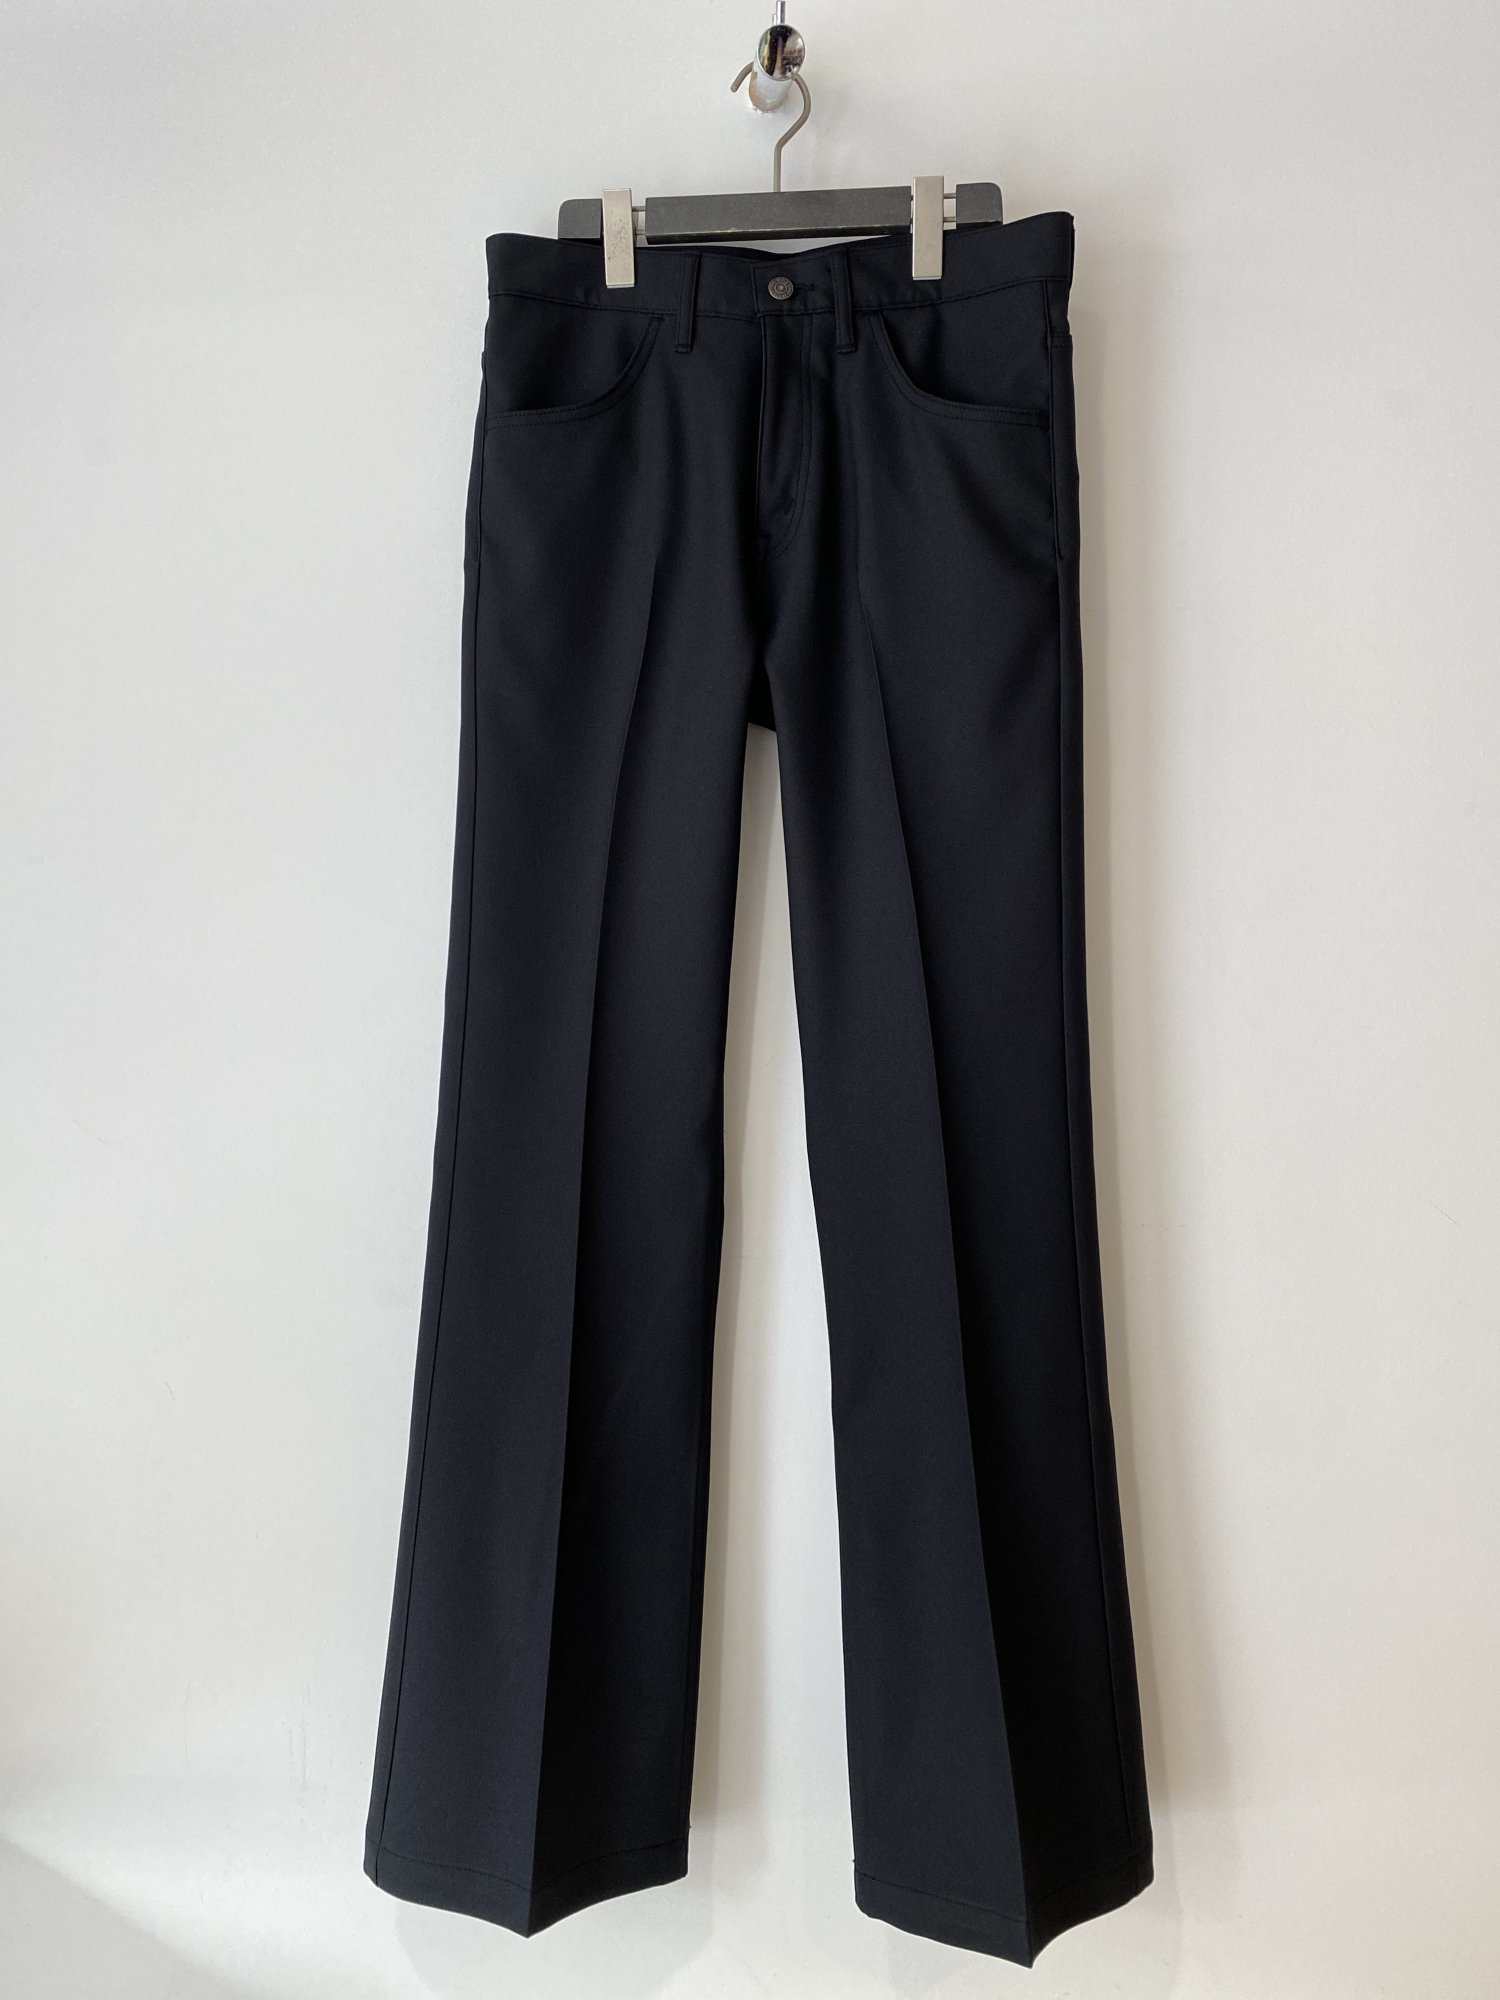 DAIRIKU<br />Flare Pressed Pants / Black<img class='new_mark_img2' src='https://img.shop-pro.jp/img/new/icons14.gif' style='border:none;display:inline;margin:0px;padding:0px;width:auto;' />